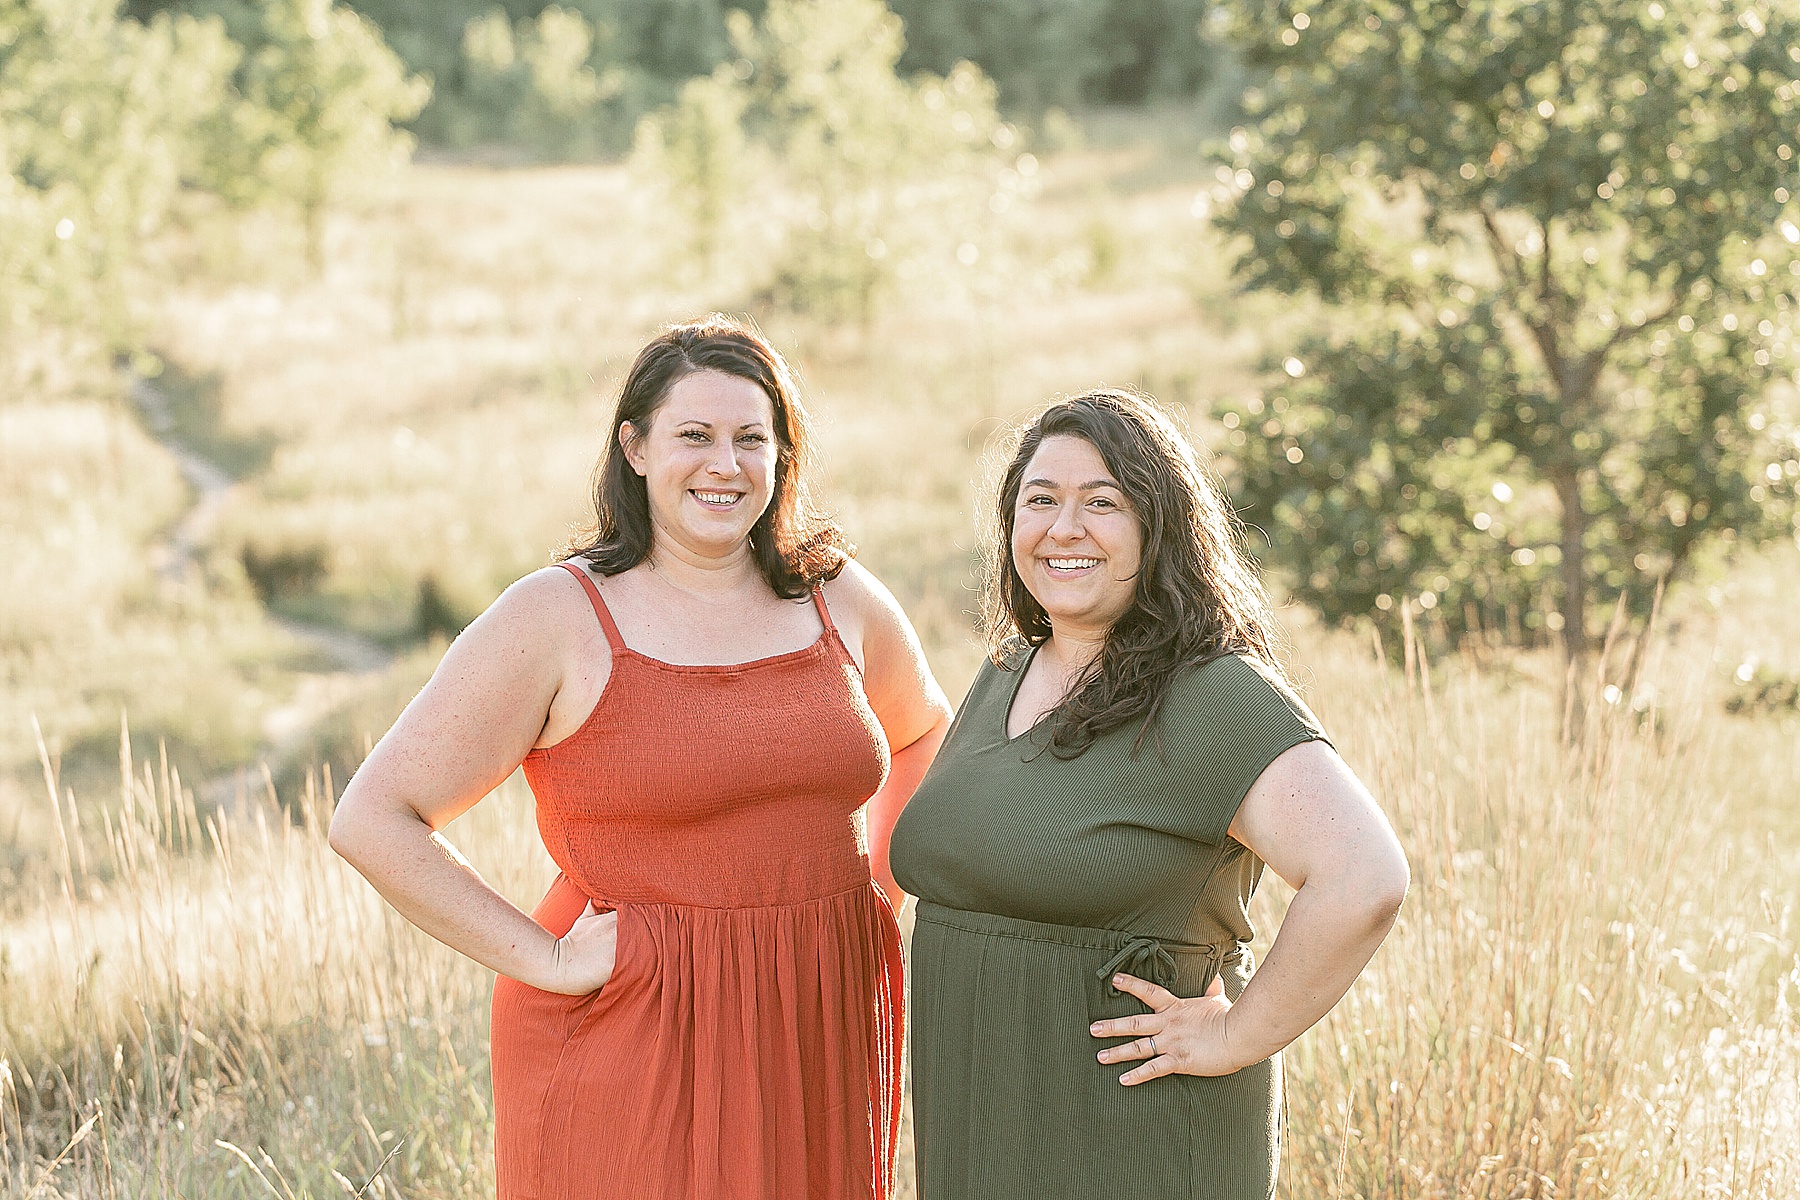 Two light skinned women out in nature. One is dressed in an orange summer dress and the other is dressed in an olive green dress. They are both doulas in SW Portland Oregon.